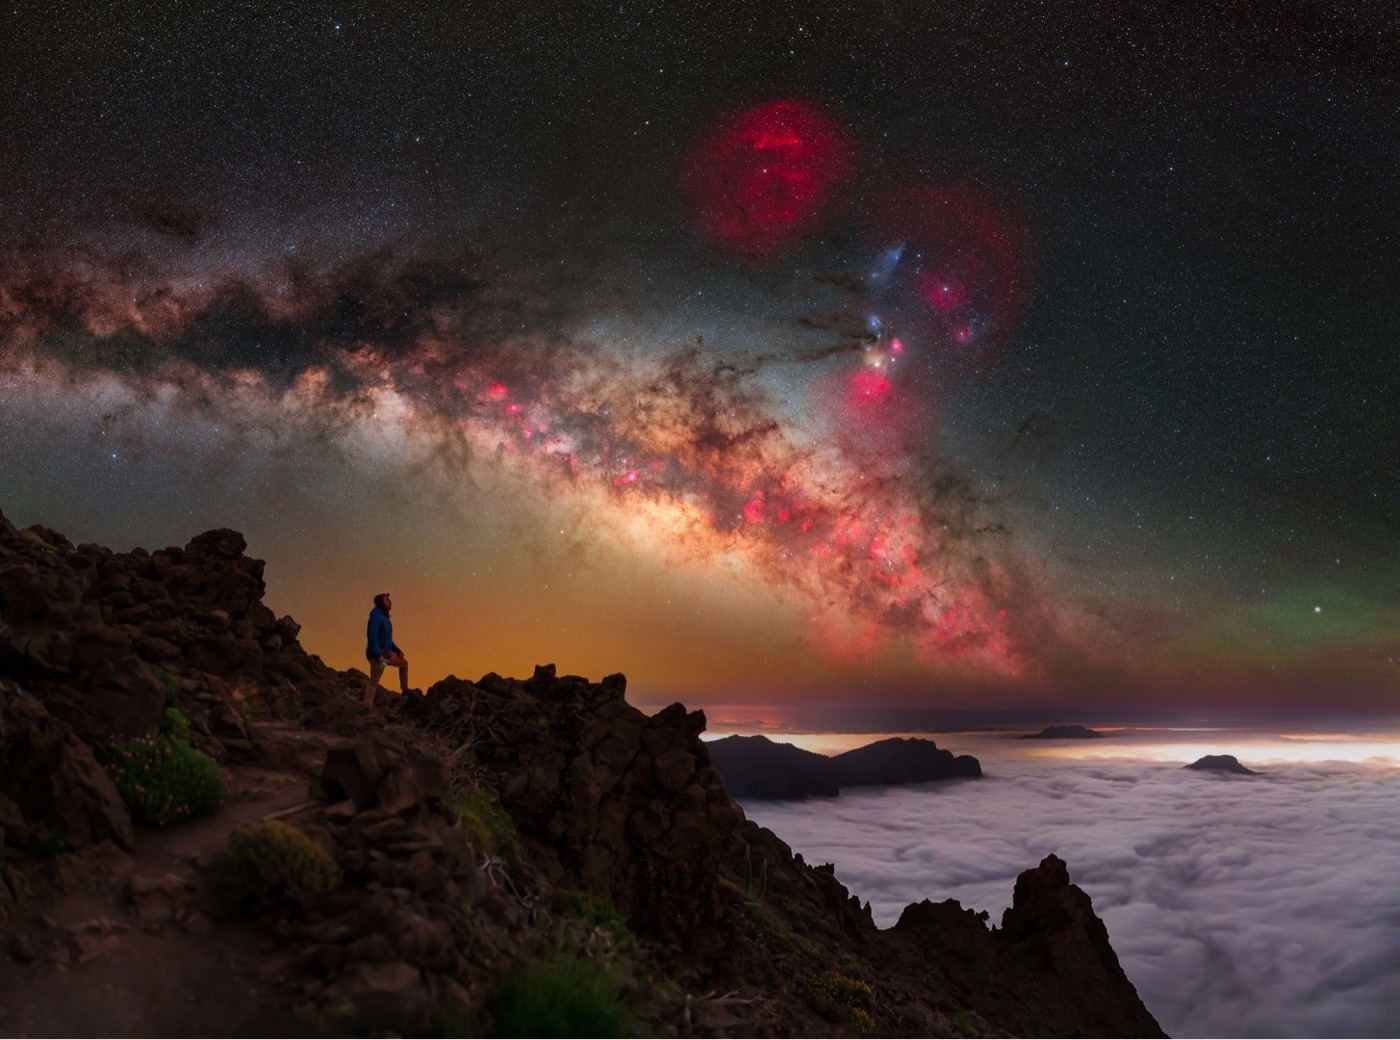 the Milky Way shines brilliantly at night above the mountains and a layer of clouds